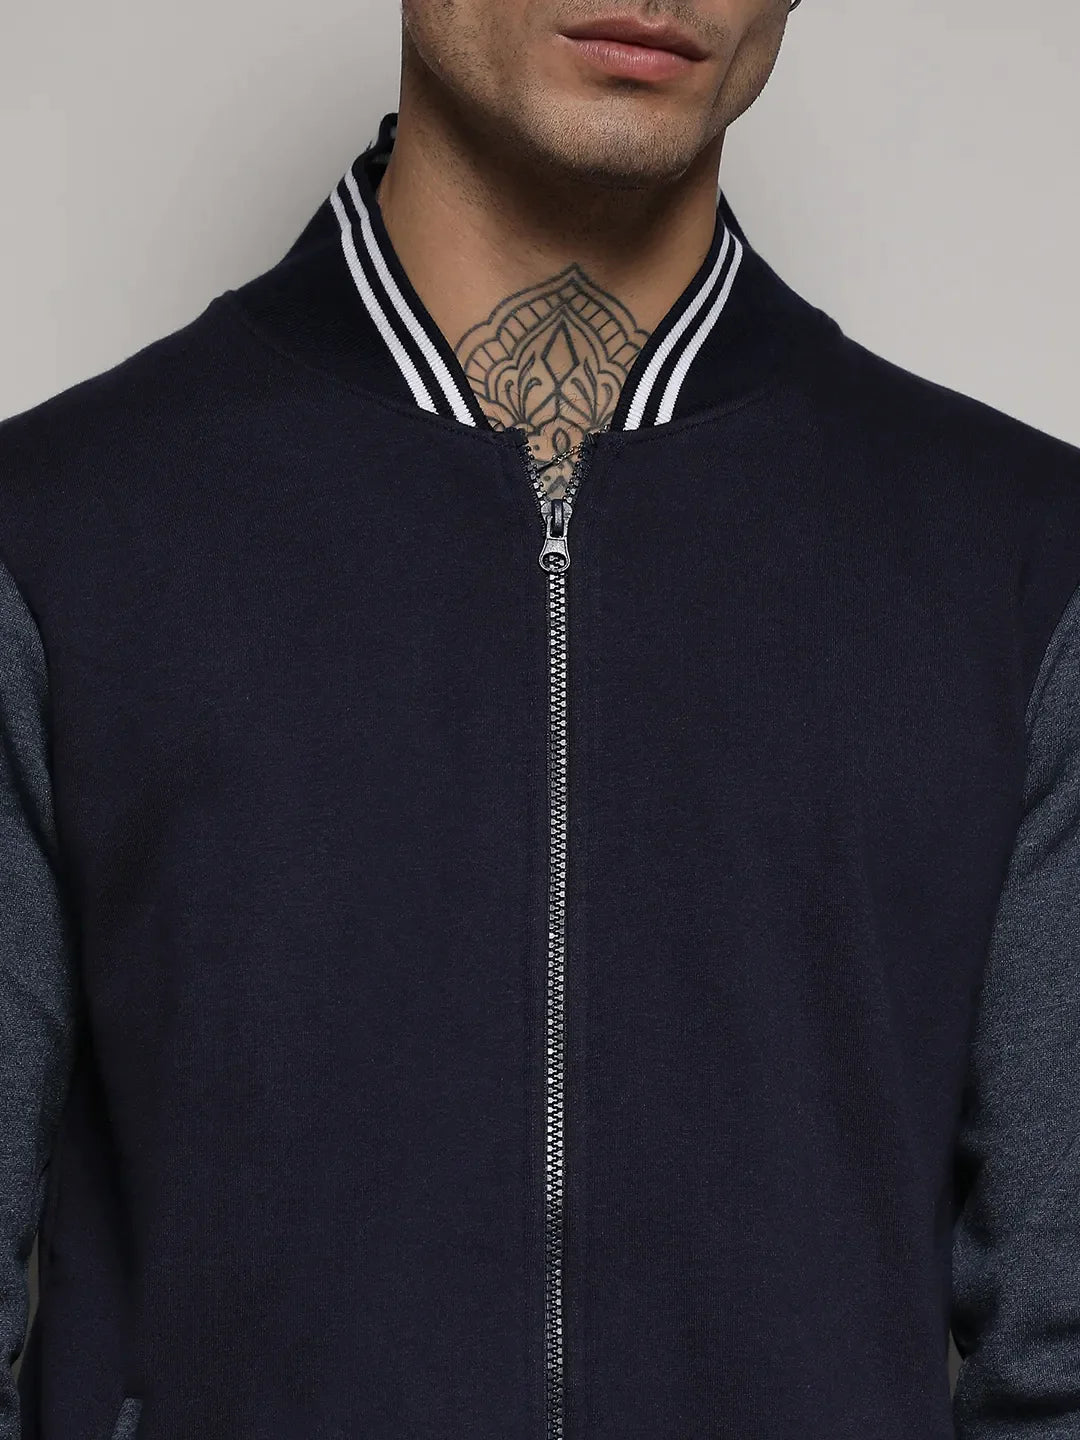 Navy Blue Zip-Front Jacket With Contrast Striped Hem